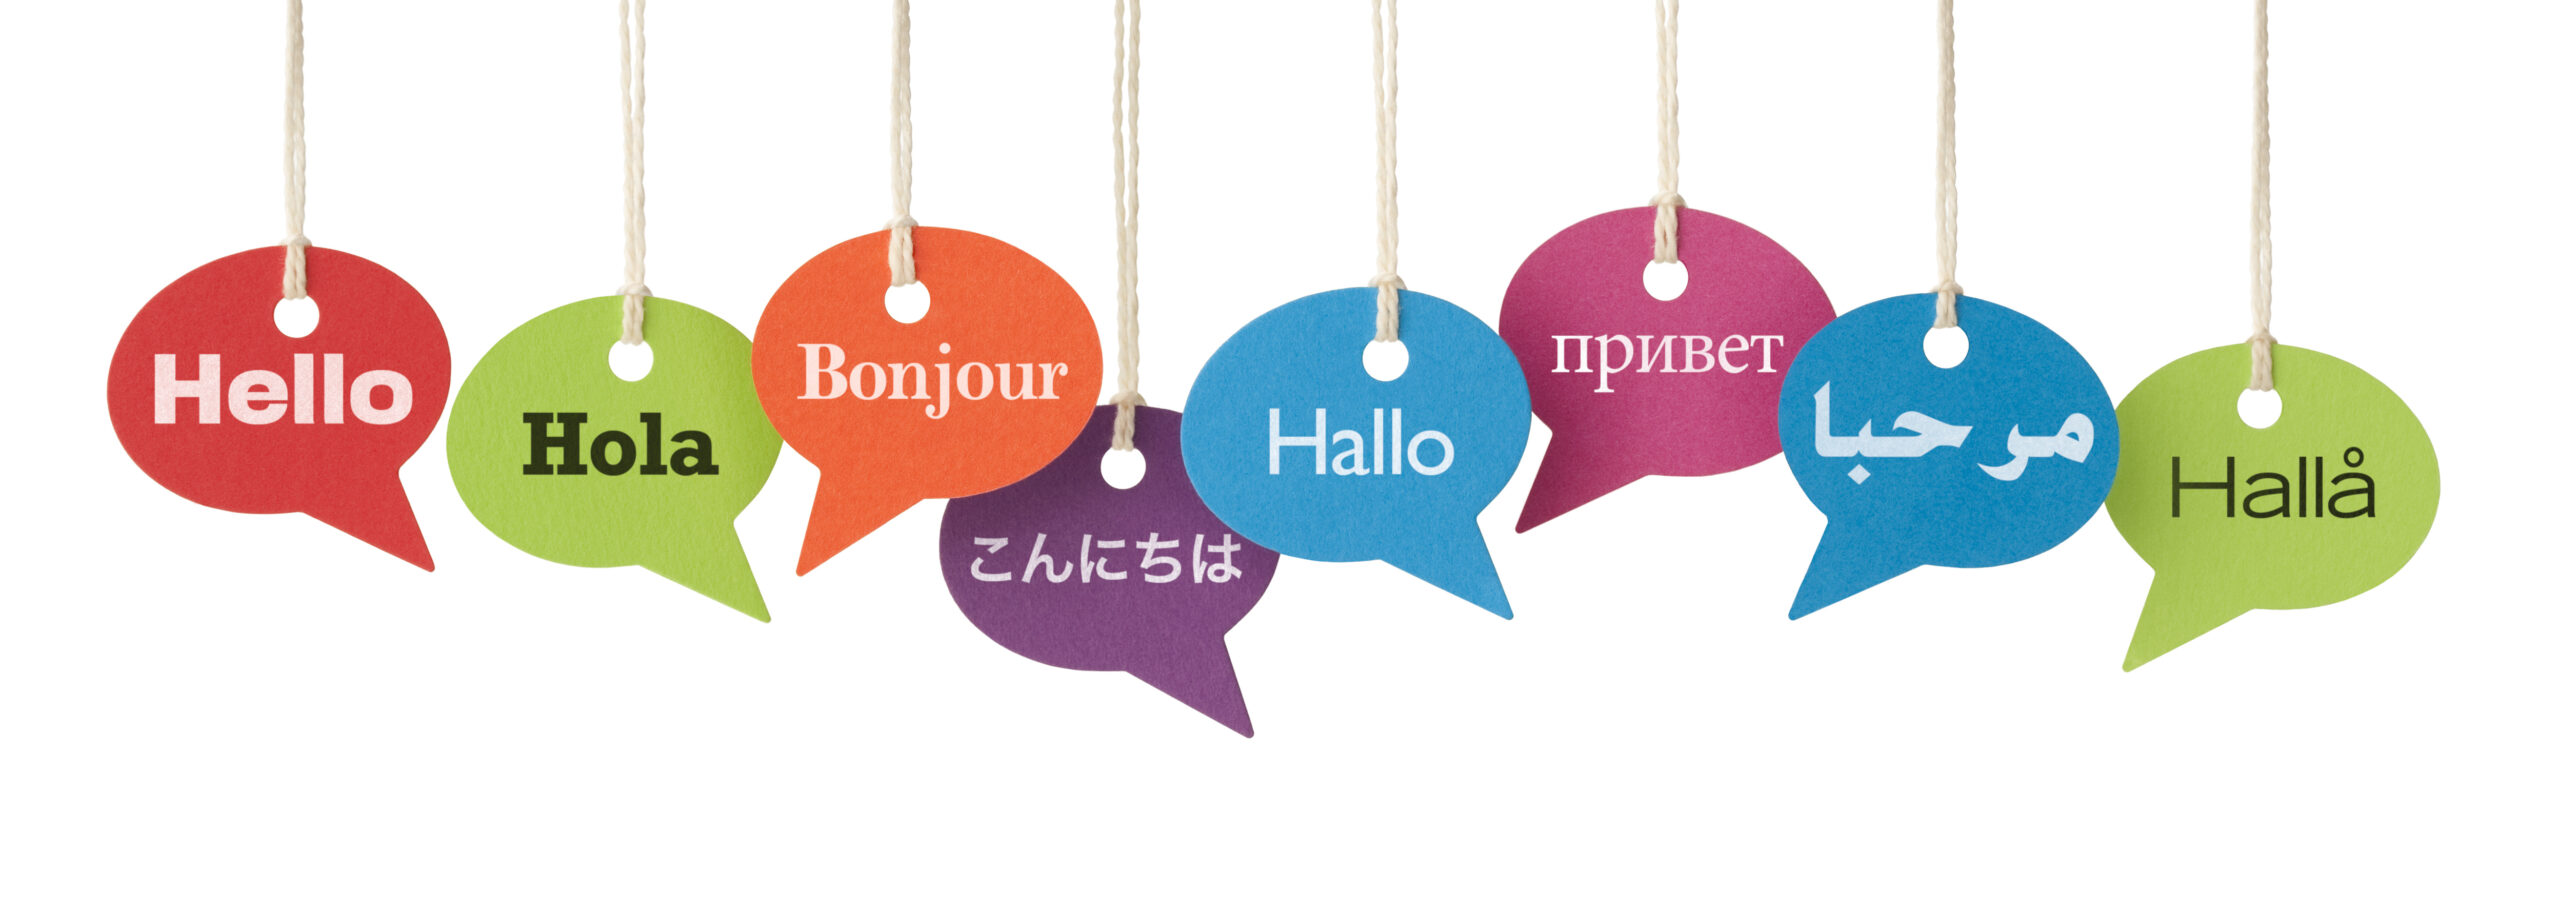 Speech bubbles contain the word HELLO in eight different languages. English, Spanish, French, Japanese, German, Russian, Arabic and Swedish. International business, translation services etc. Isolated on a pure white background, absolutely no dot in the white area – no need to cut-out.